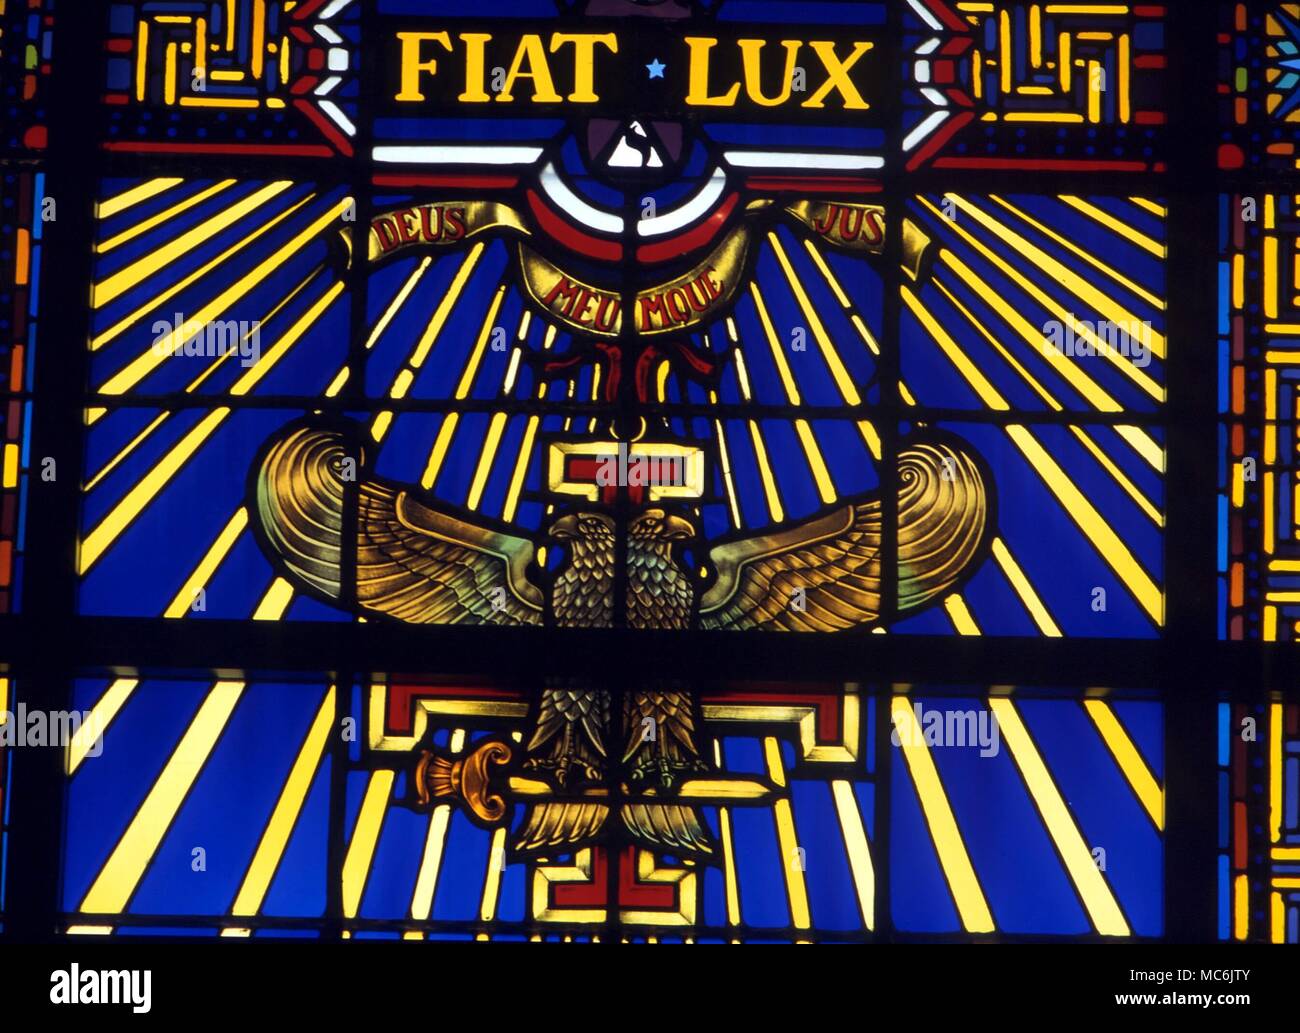 MASONIC - DOUBLE-HEADED EAGLE. The double-headed Eagle in the light of the Fiat Lux, Masonic symbol of the Supreme Council, Souther Jurisdiction, Washington DC. Stained glass in the Temple Stock Photo